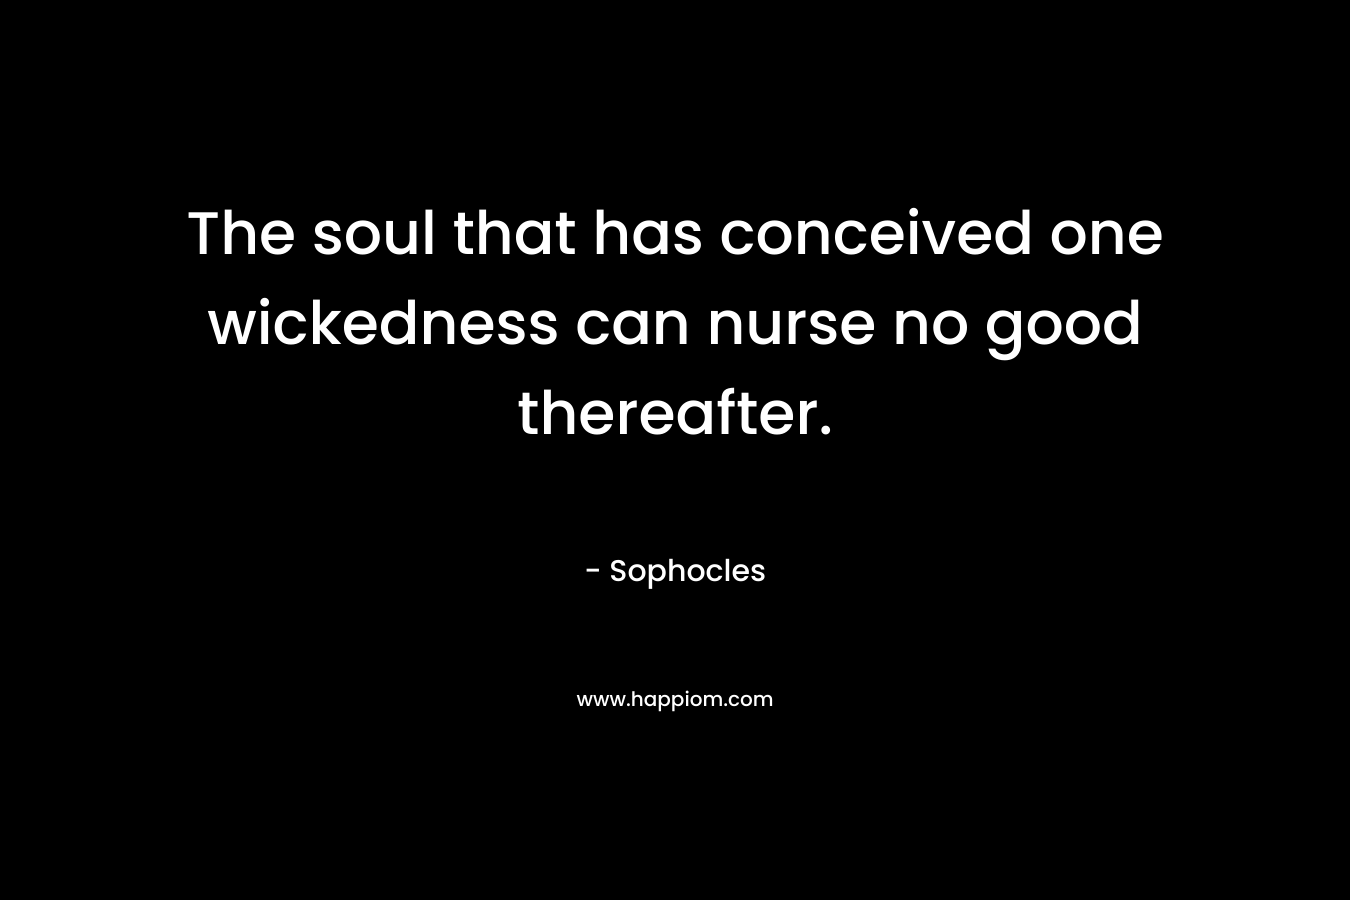 The soul that has conceived one wickedness can nurse no good thereafter. – Sophocles